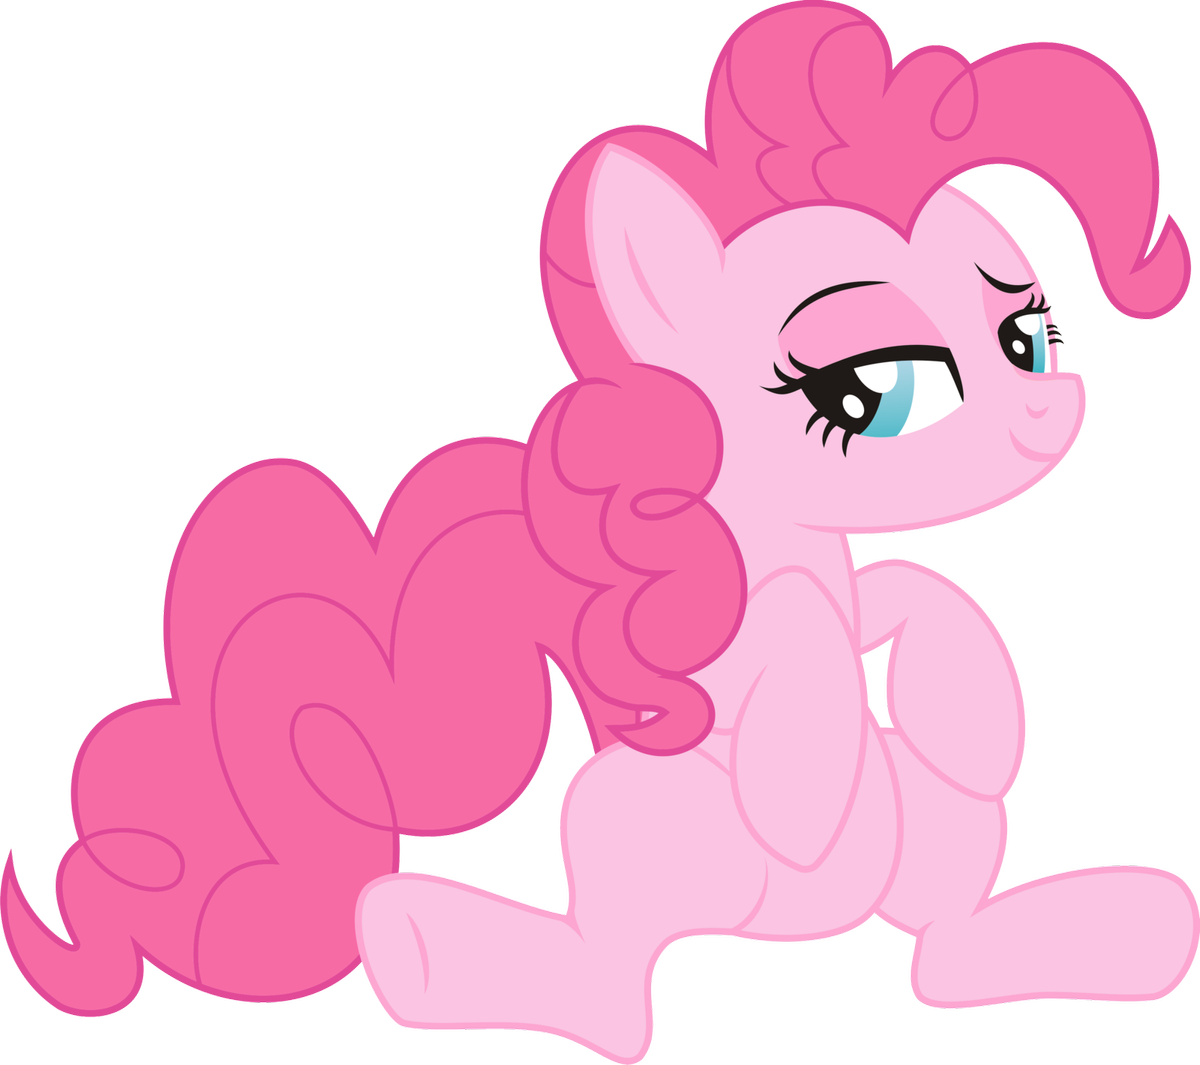 pinkie pie naked png not final by leopur